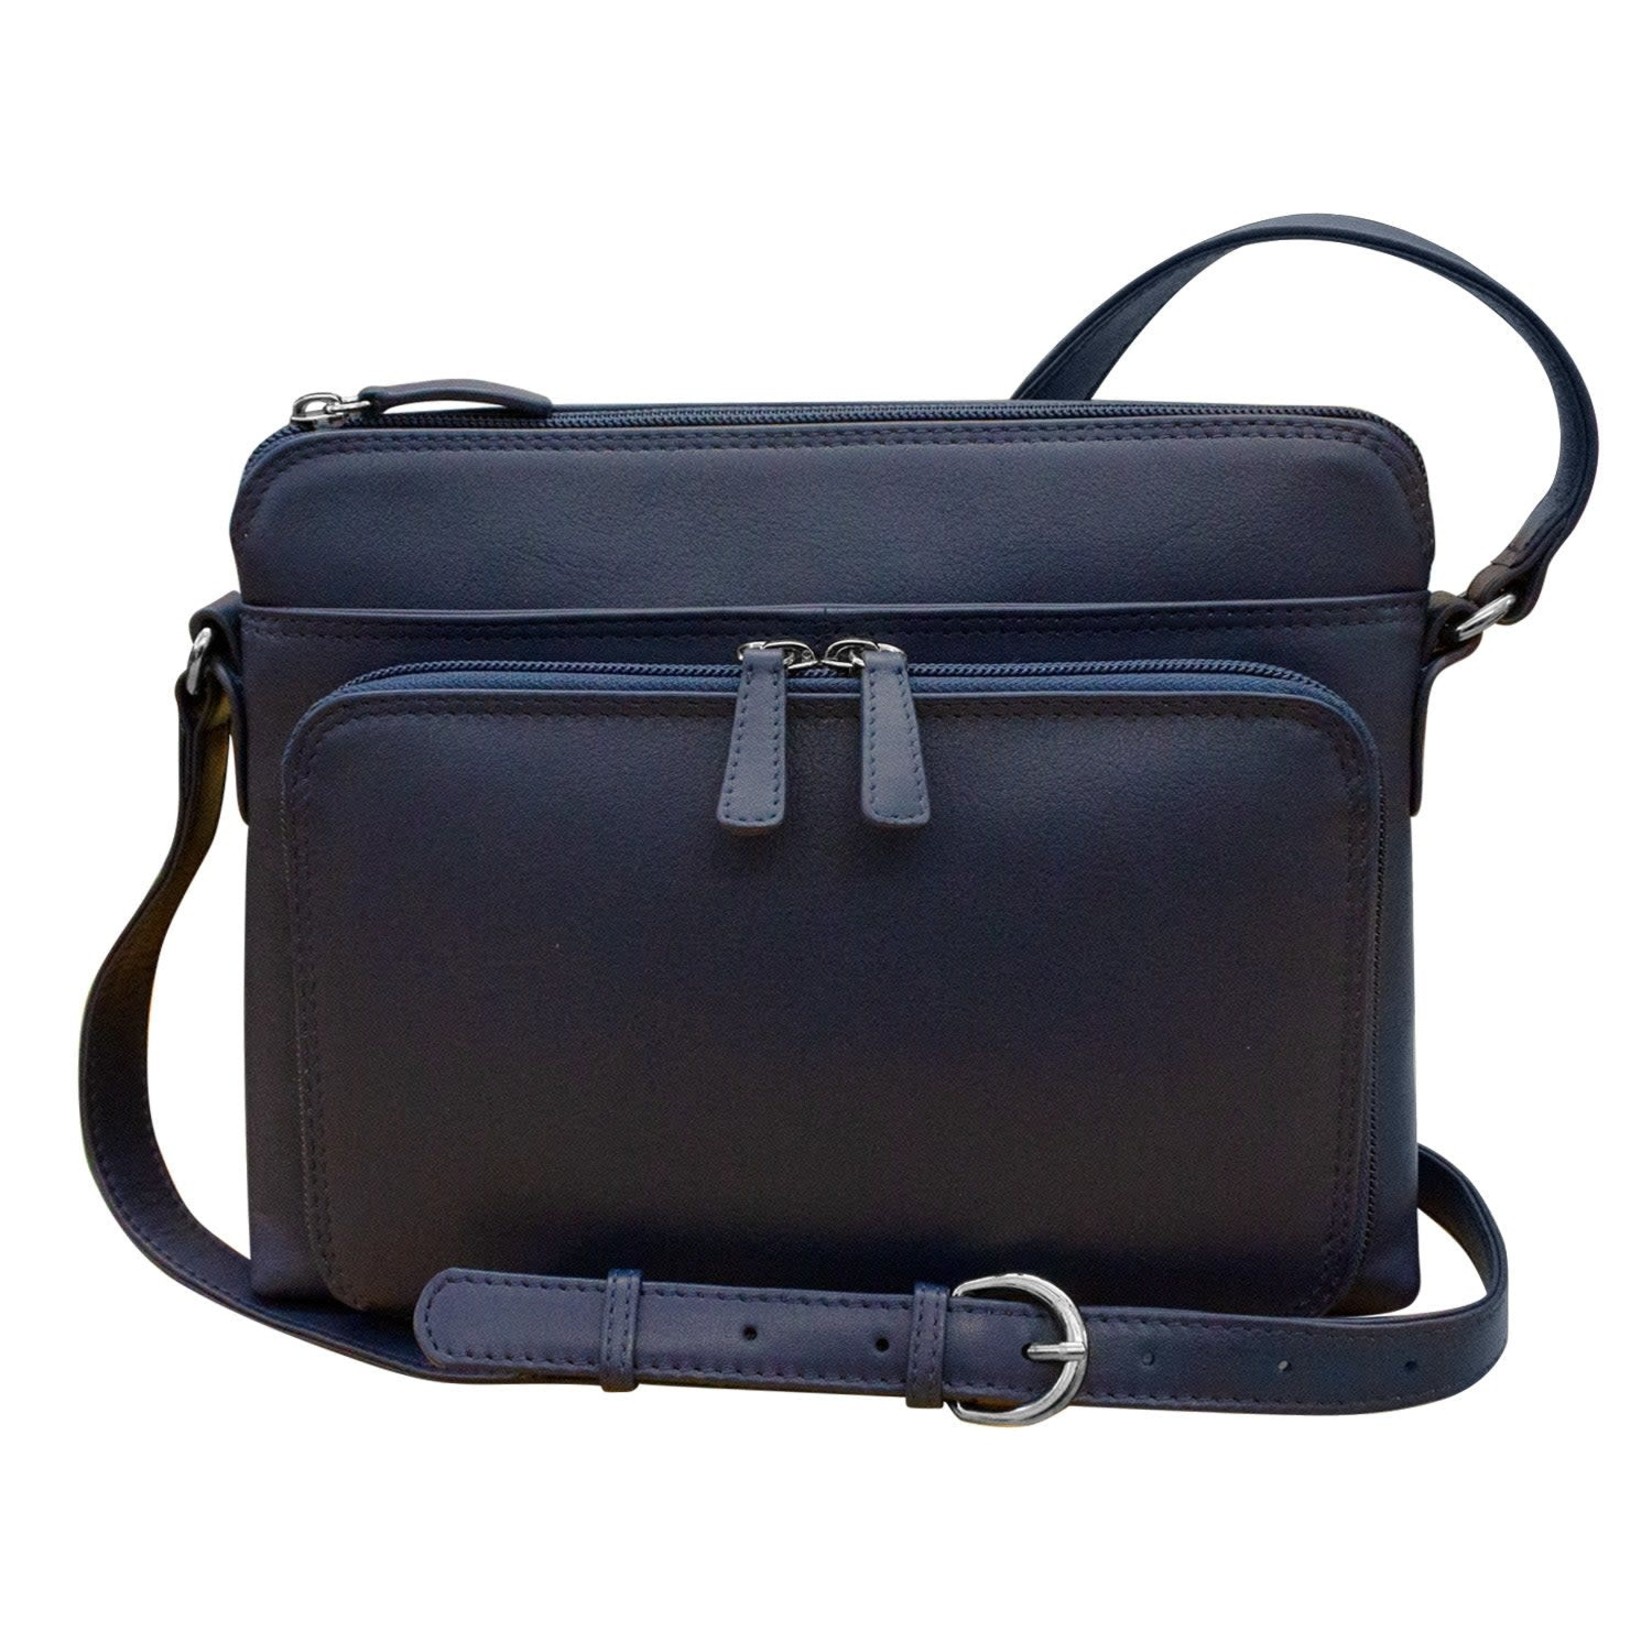 Leather Handbags and Accessories 6333 Classic Navy - Organizer Bag